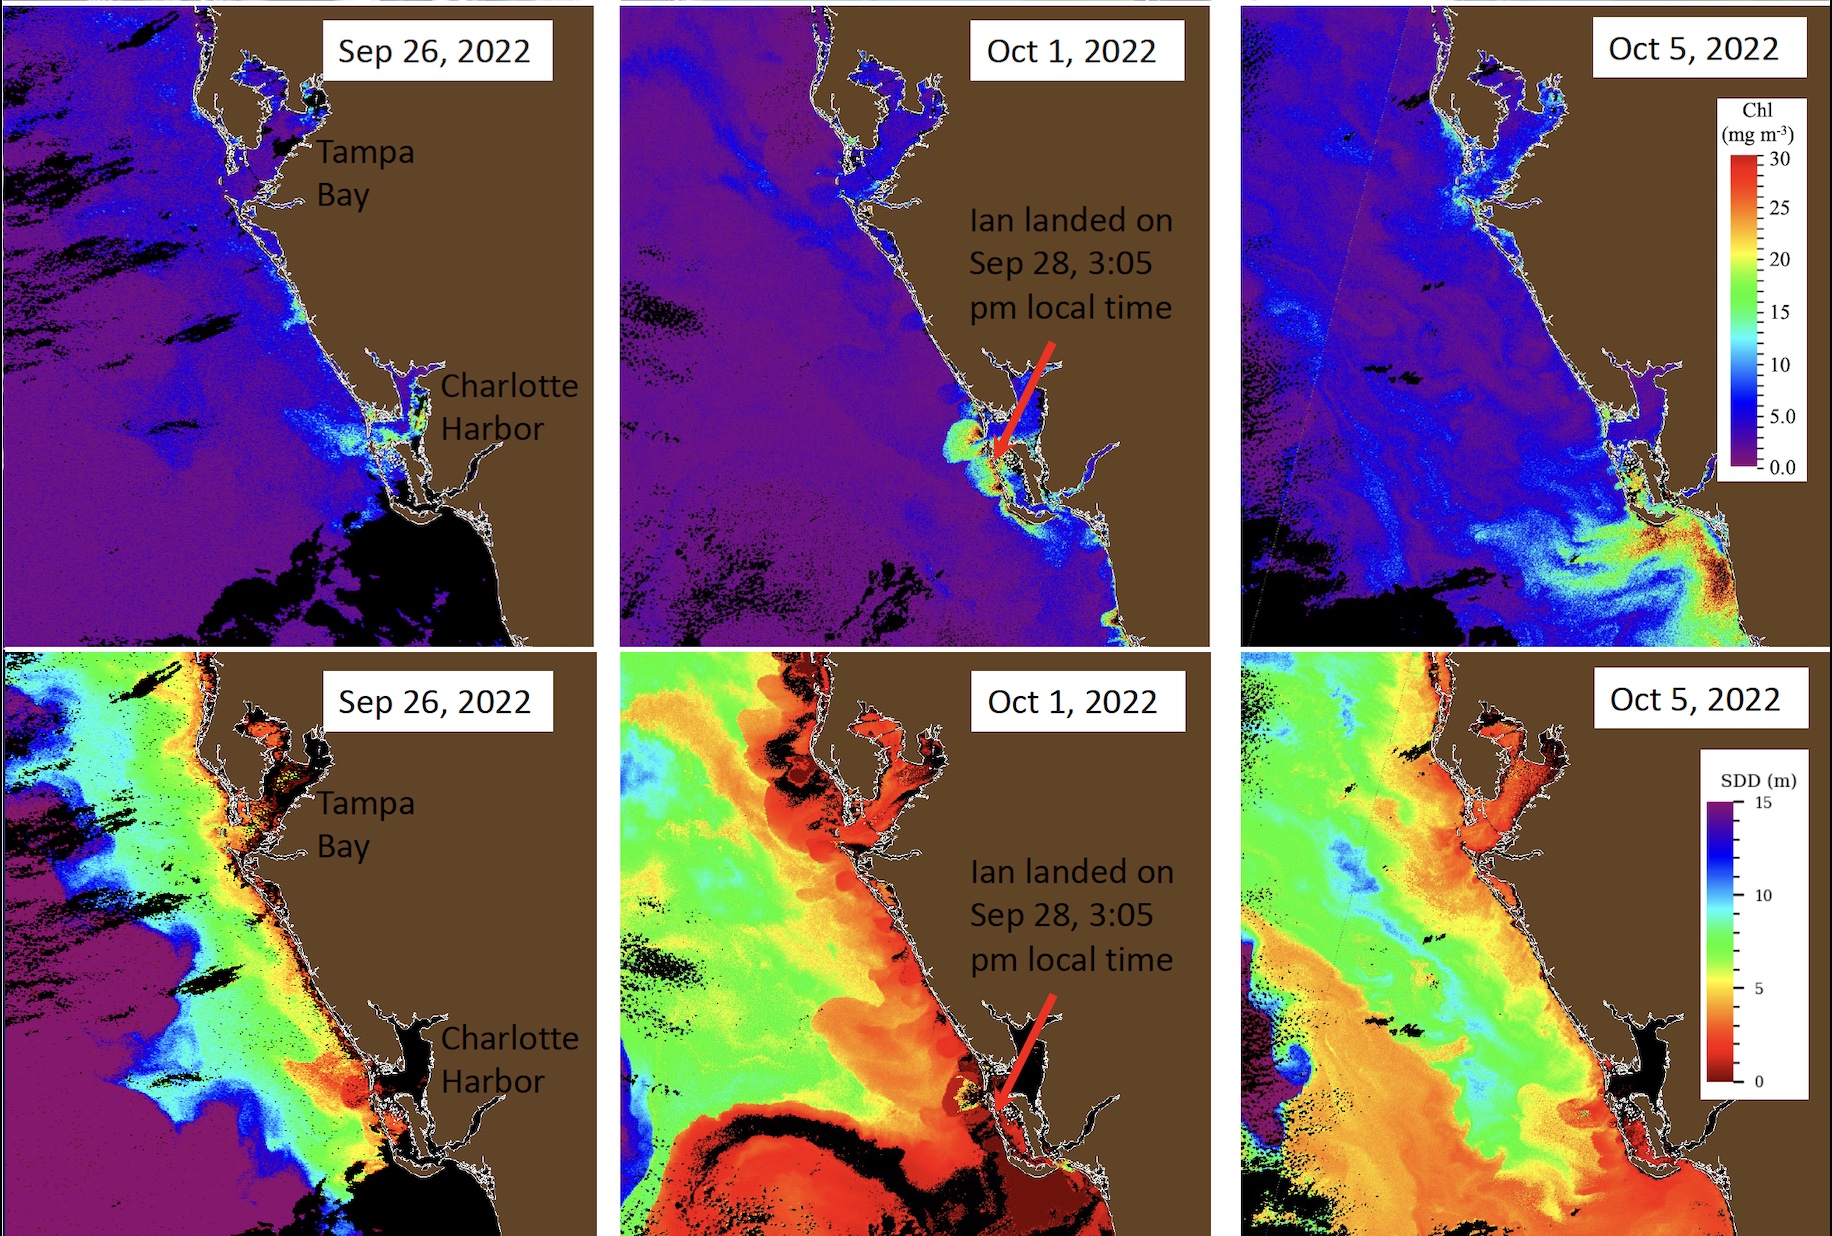 Top: High concentrations of chlorophyll-a (an index for algae) are found mostly near Charlotte Harbor mouth and Sanibel Island on October 1, which further developed to an extensive algae bloom, mostly south of the Sanibel Island, a few days later. Bottom: After Ian’s landfall, water clarity reduced to between two and five meters in some nearshore regions.